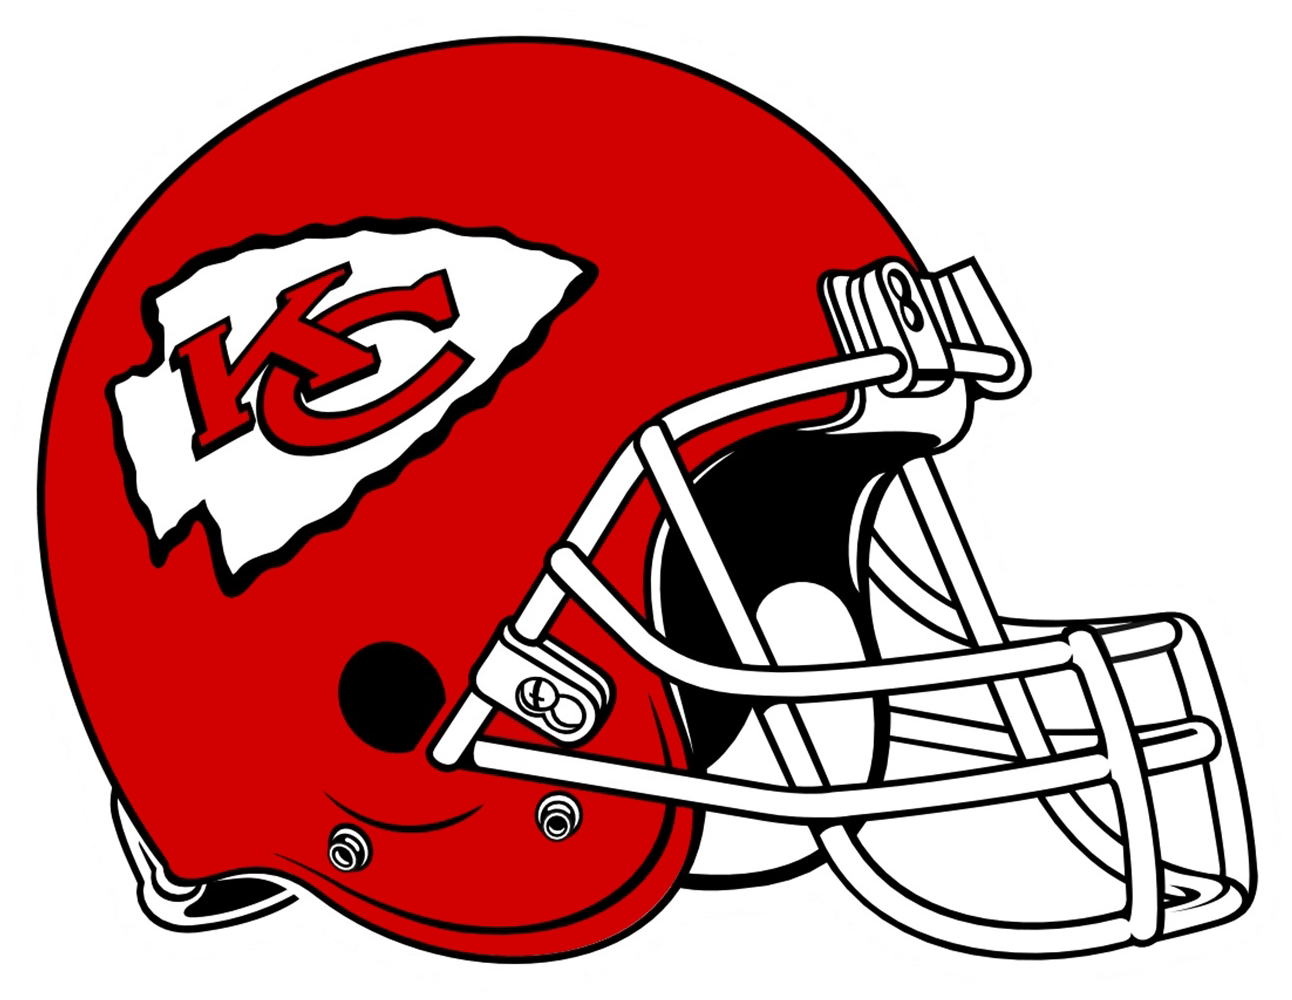 Download and share clipart about Logo Kansas City Chiefs, Find more high qu...